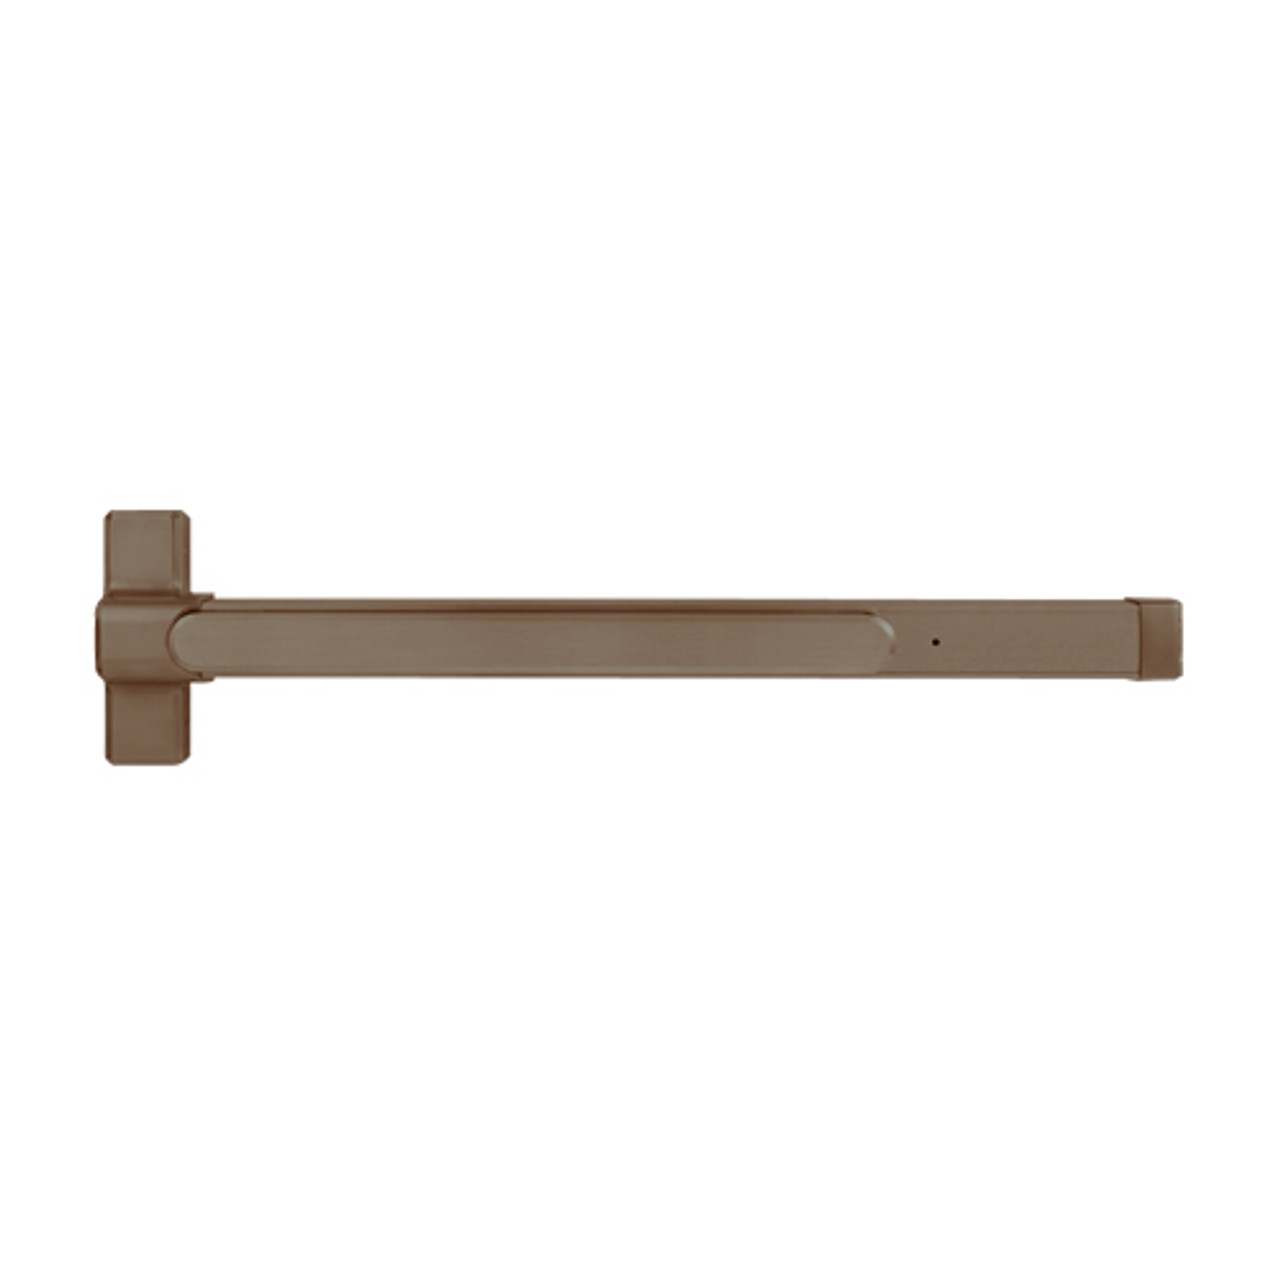 QED127X-48-8-313AN Stanley QED100 Series Heavy Duty Concealed Vertical Rod Hex Dog Exit Device in Anodized Duranodic Bronze Finish